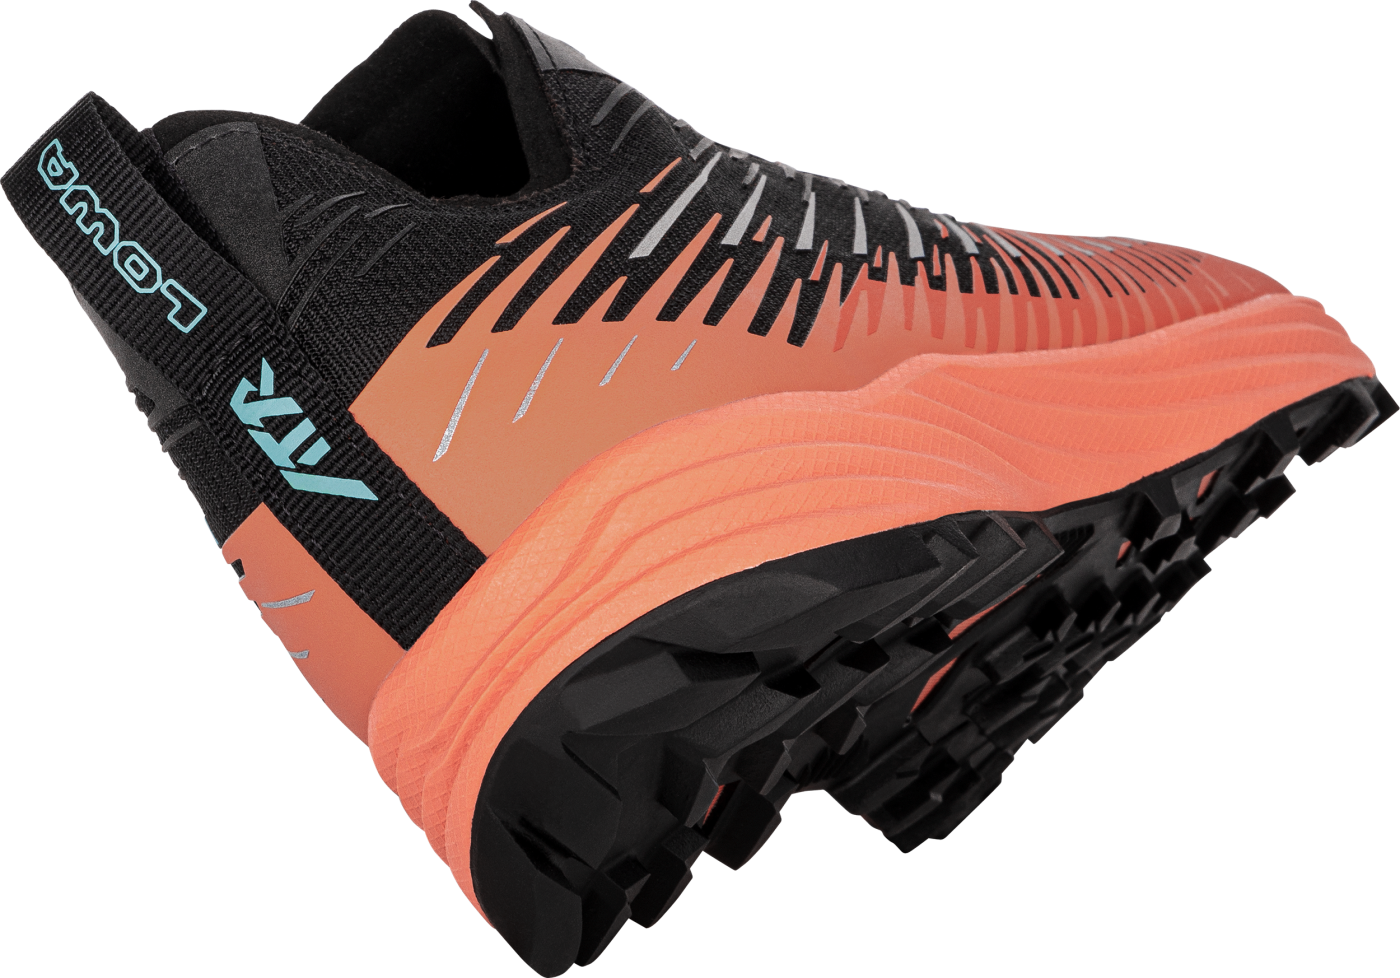 CITUX Ws: ALL TERRAIN RUNNING Shoes for Women | LOWA PT